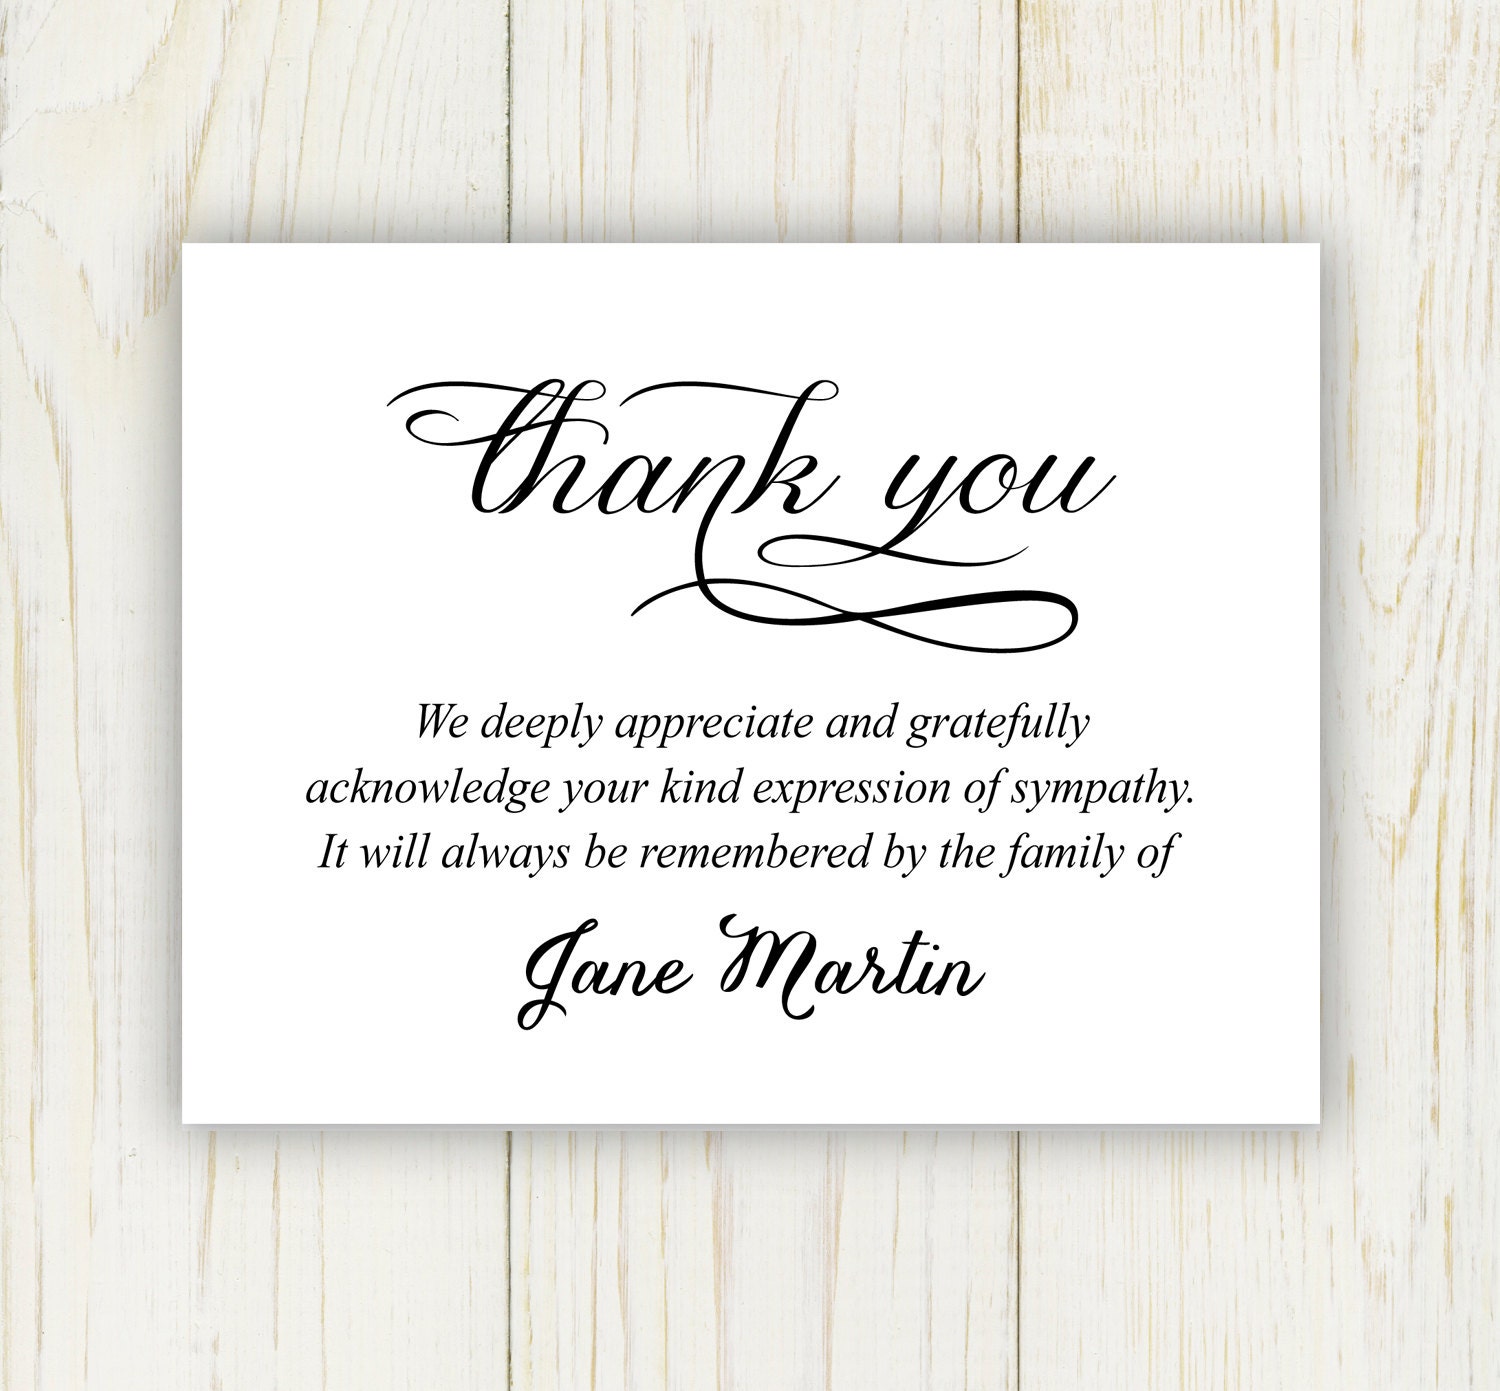 printable-thank-you-cards-from-teachers-to-students-awesome-thank-you-teacher-quotes-from-stude